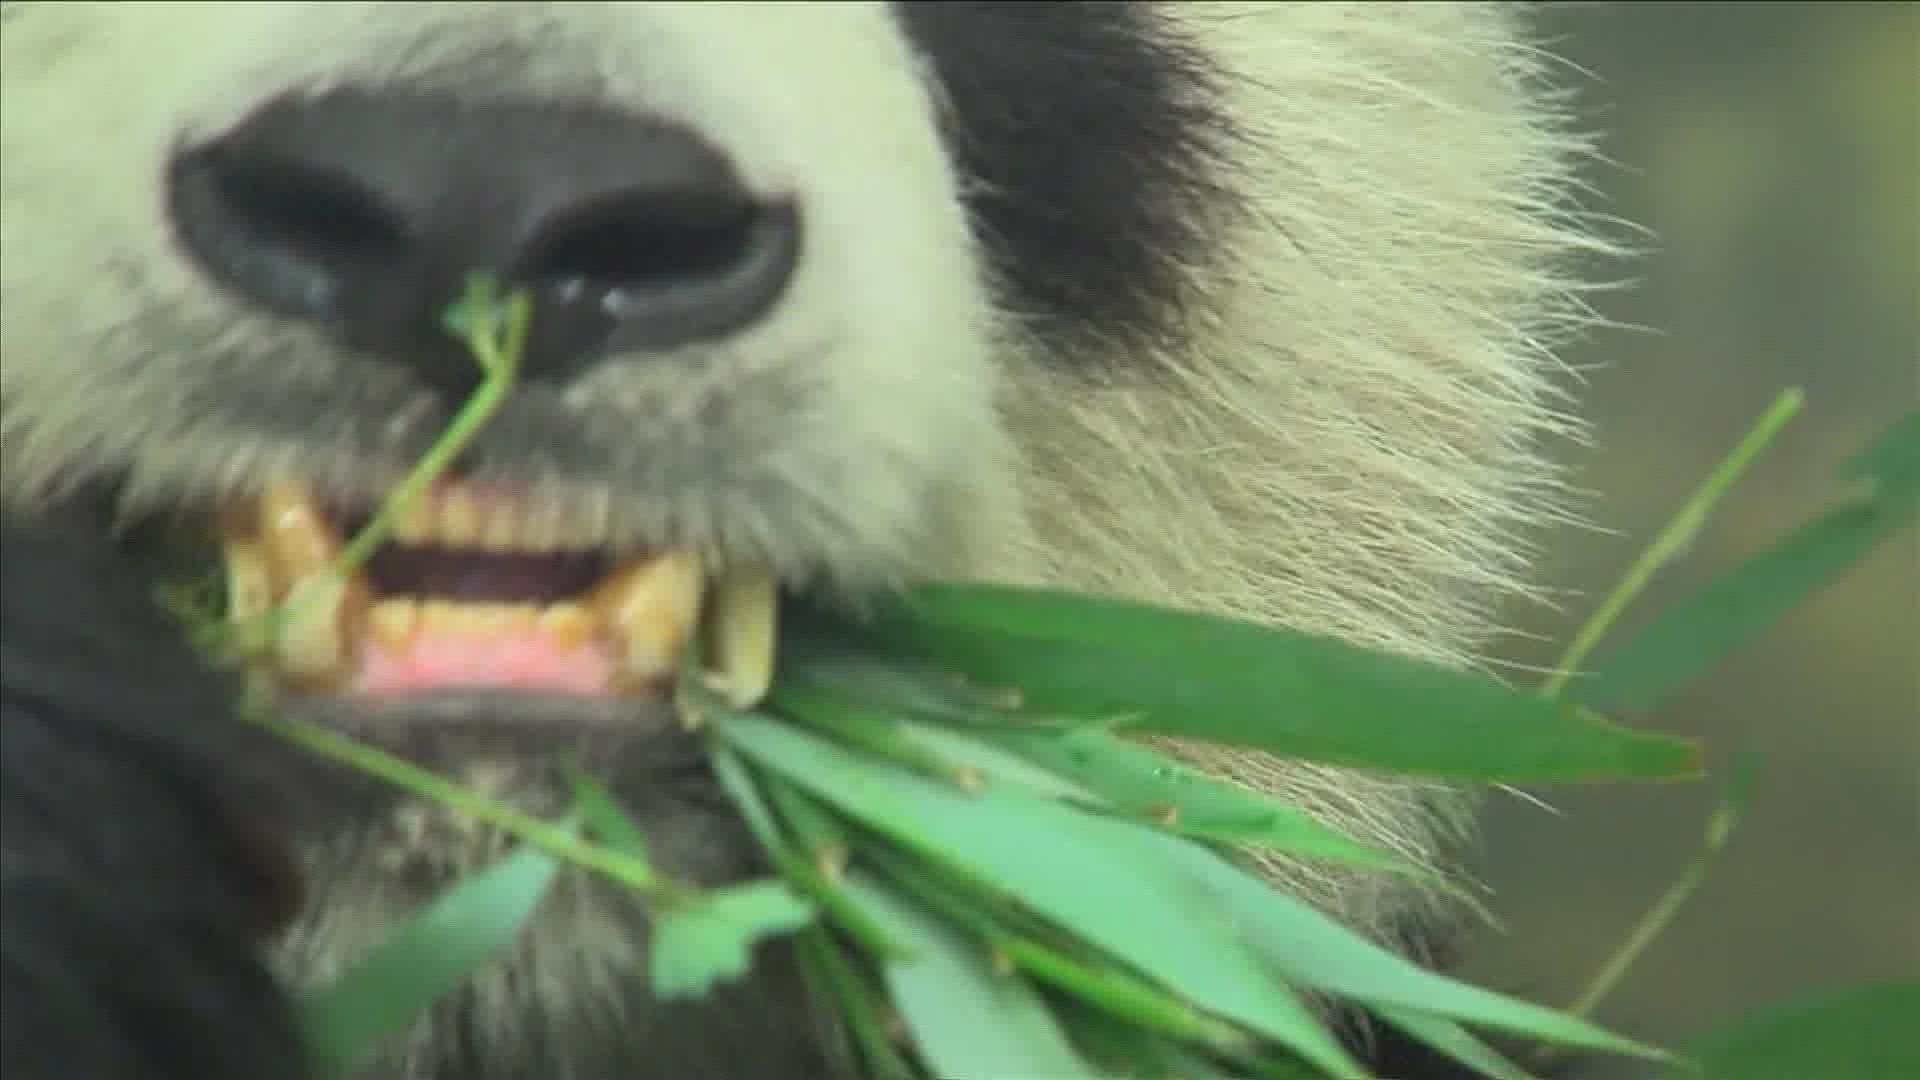 Memphis is one of the few zoos in the country to have a panda exhibit.